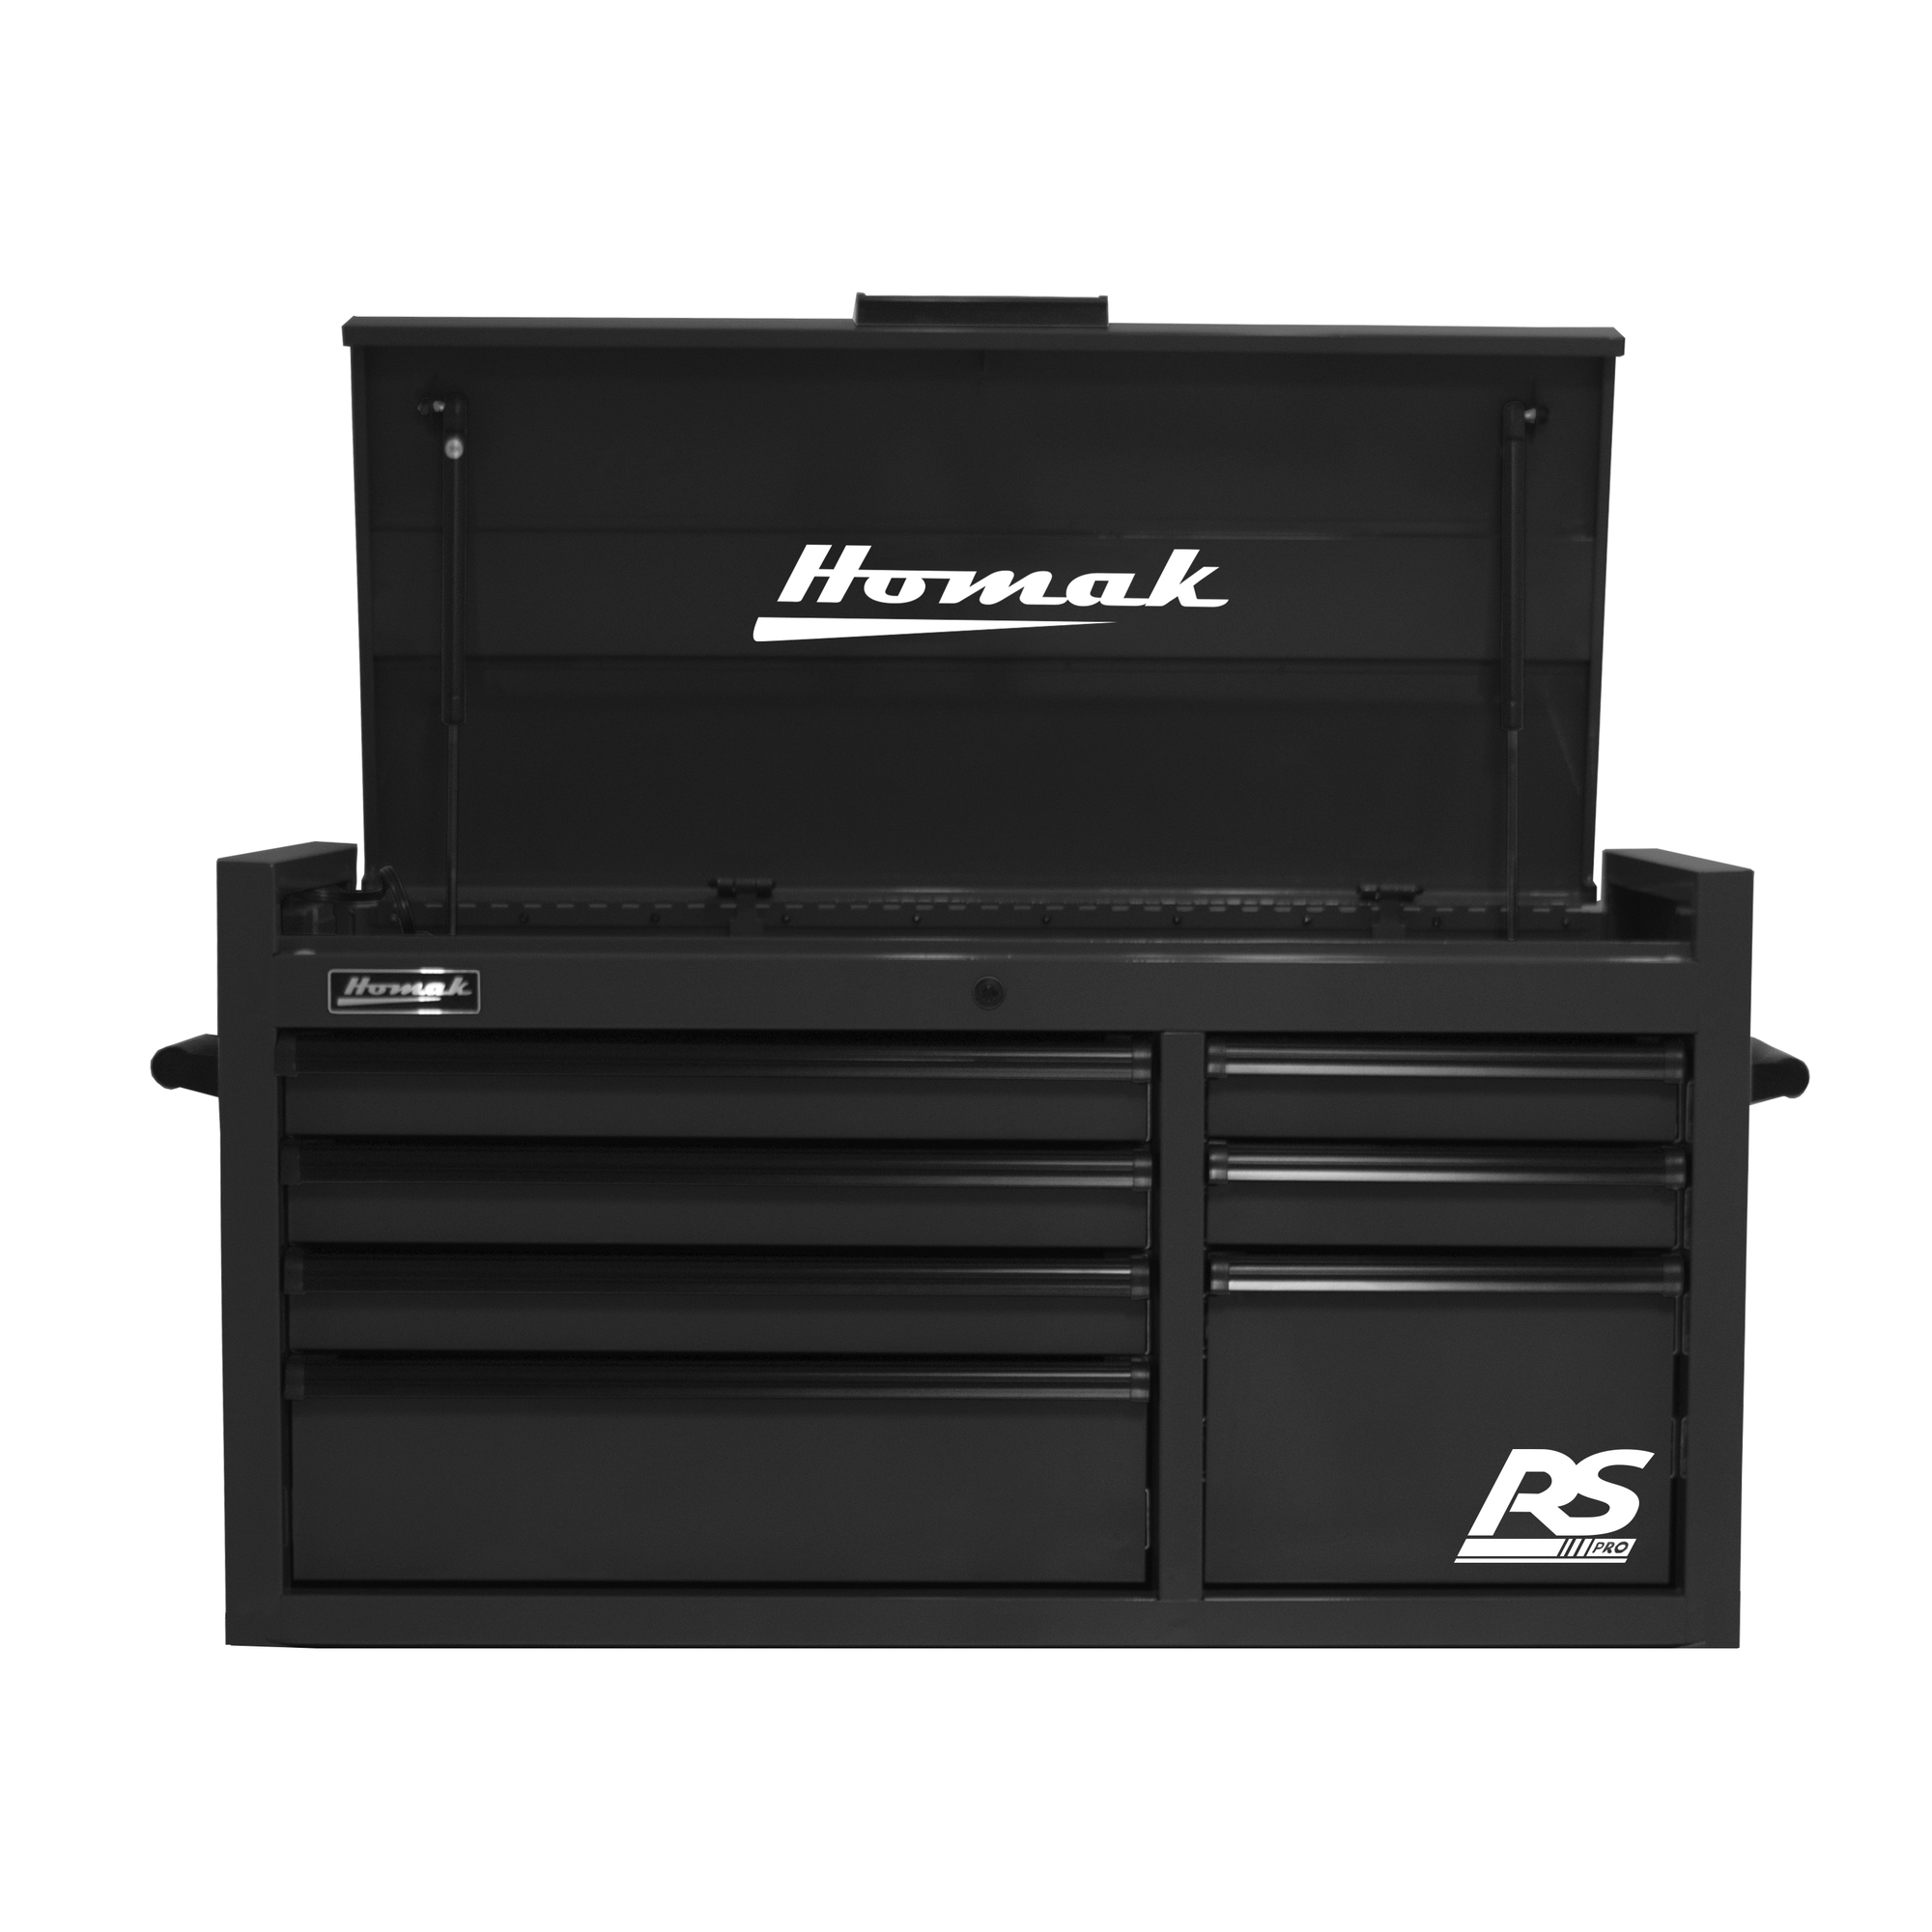 Homak RS Pro, 41Inch RS PRO 7 DWR TOP CHEST WITH OUTLET-BLACK, Width 40.5 in, Height 21.375 in, Color Black, Model BK02004173